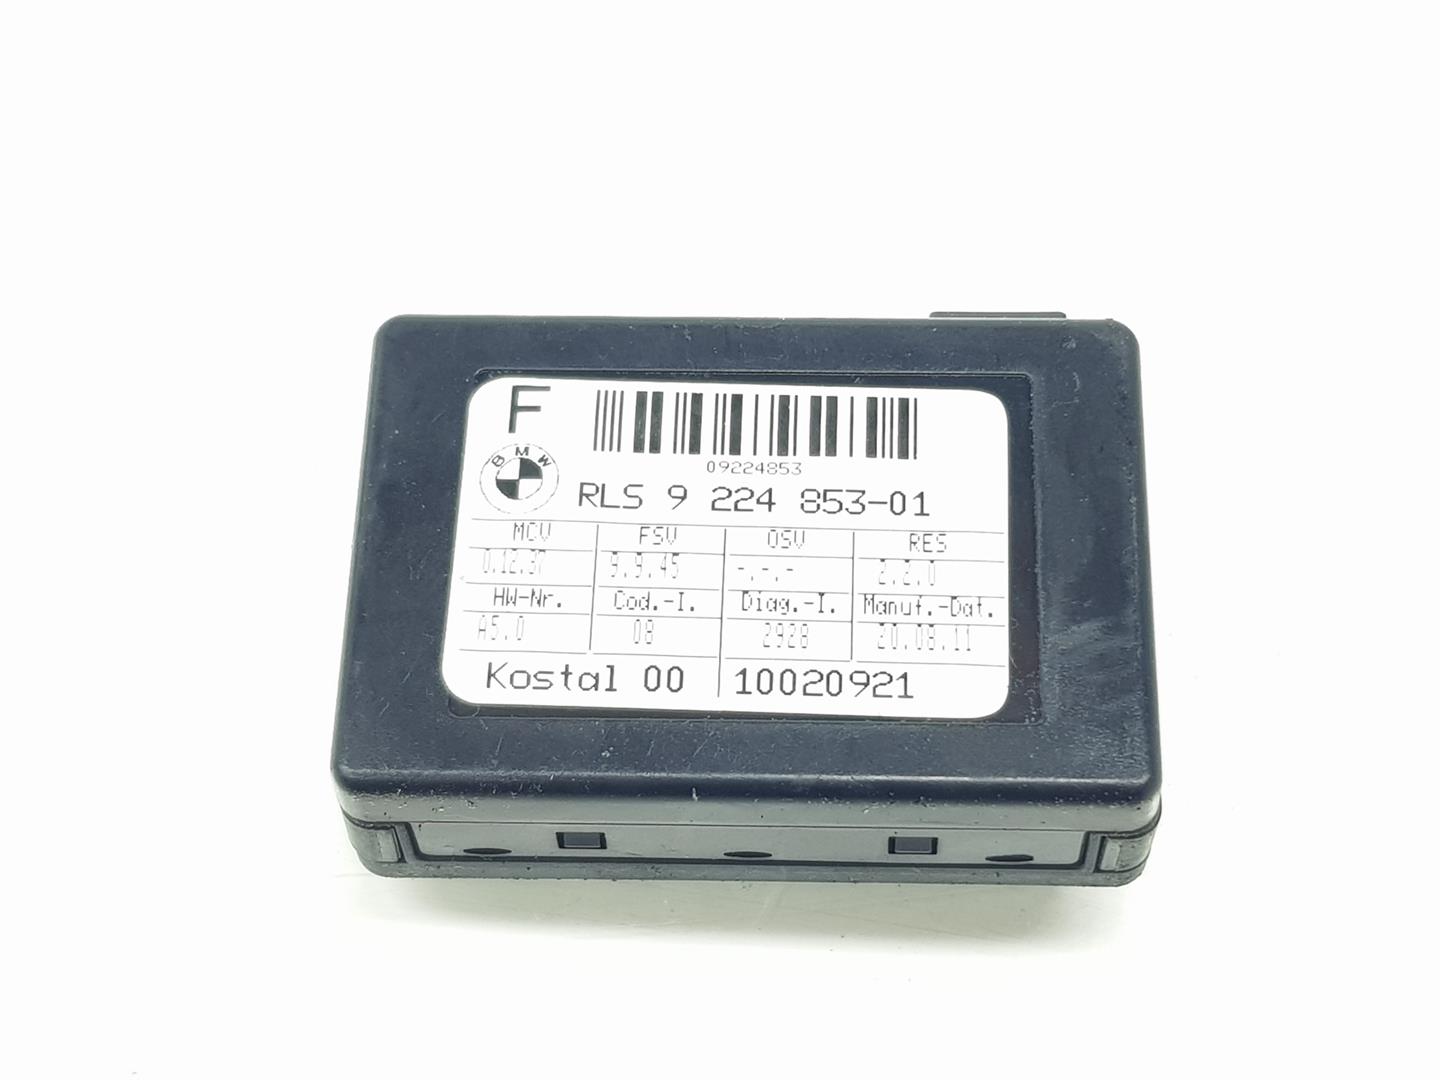 BMW X1 E84 (2009-2015) Other Control Units 9224853, 61359224853 23894807